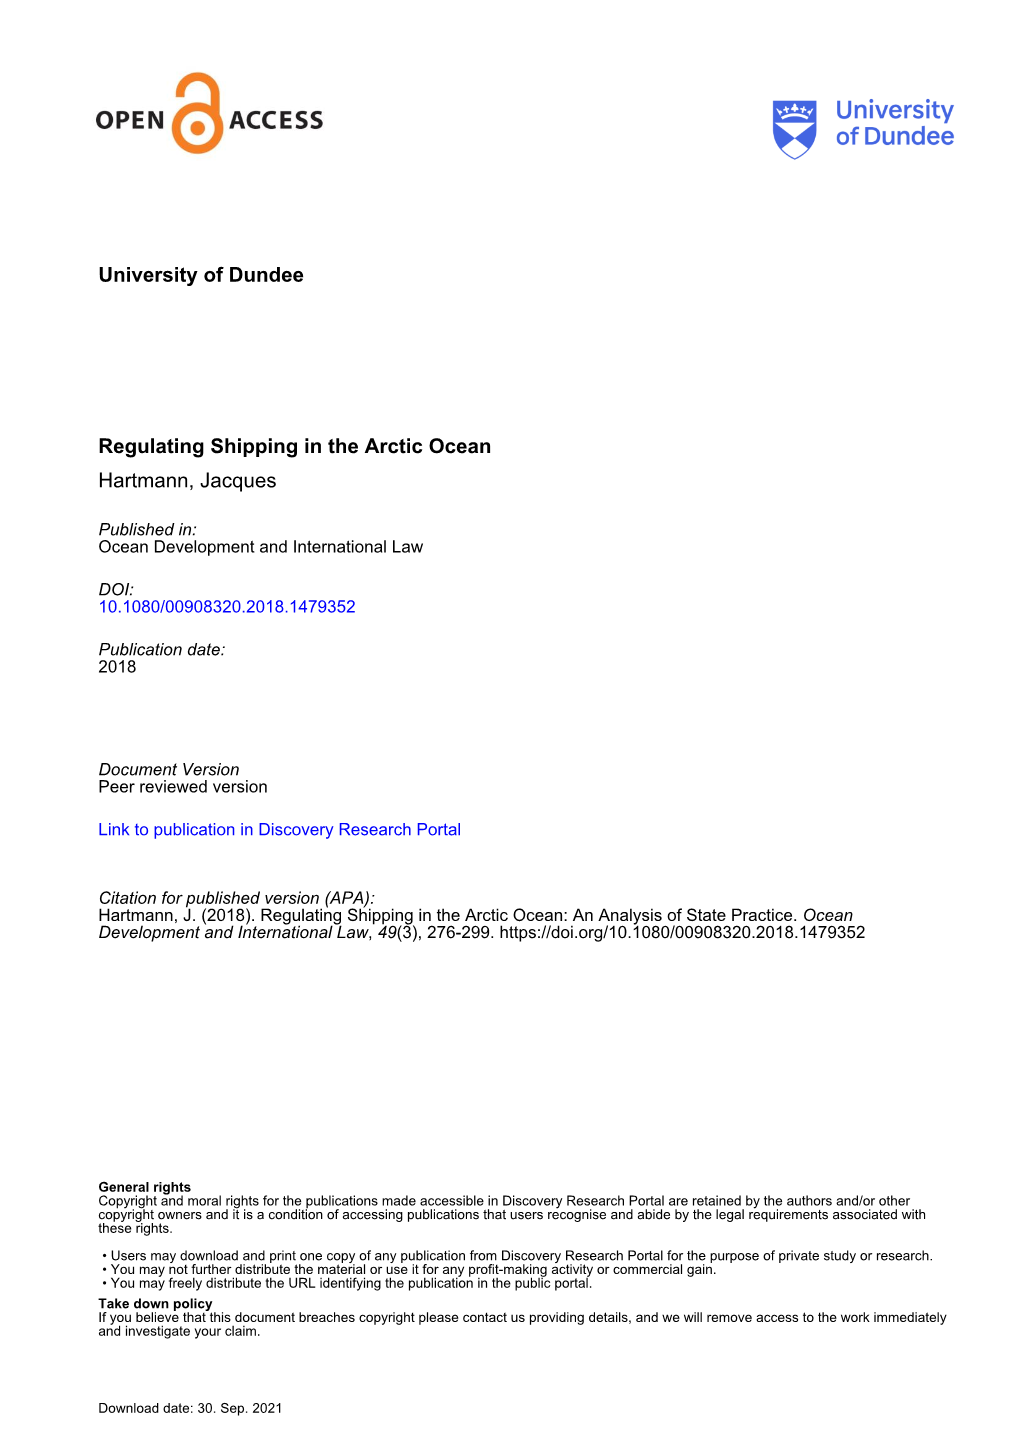 University of Dundee Regulating Shipping in the Arctic Ocean